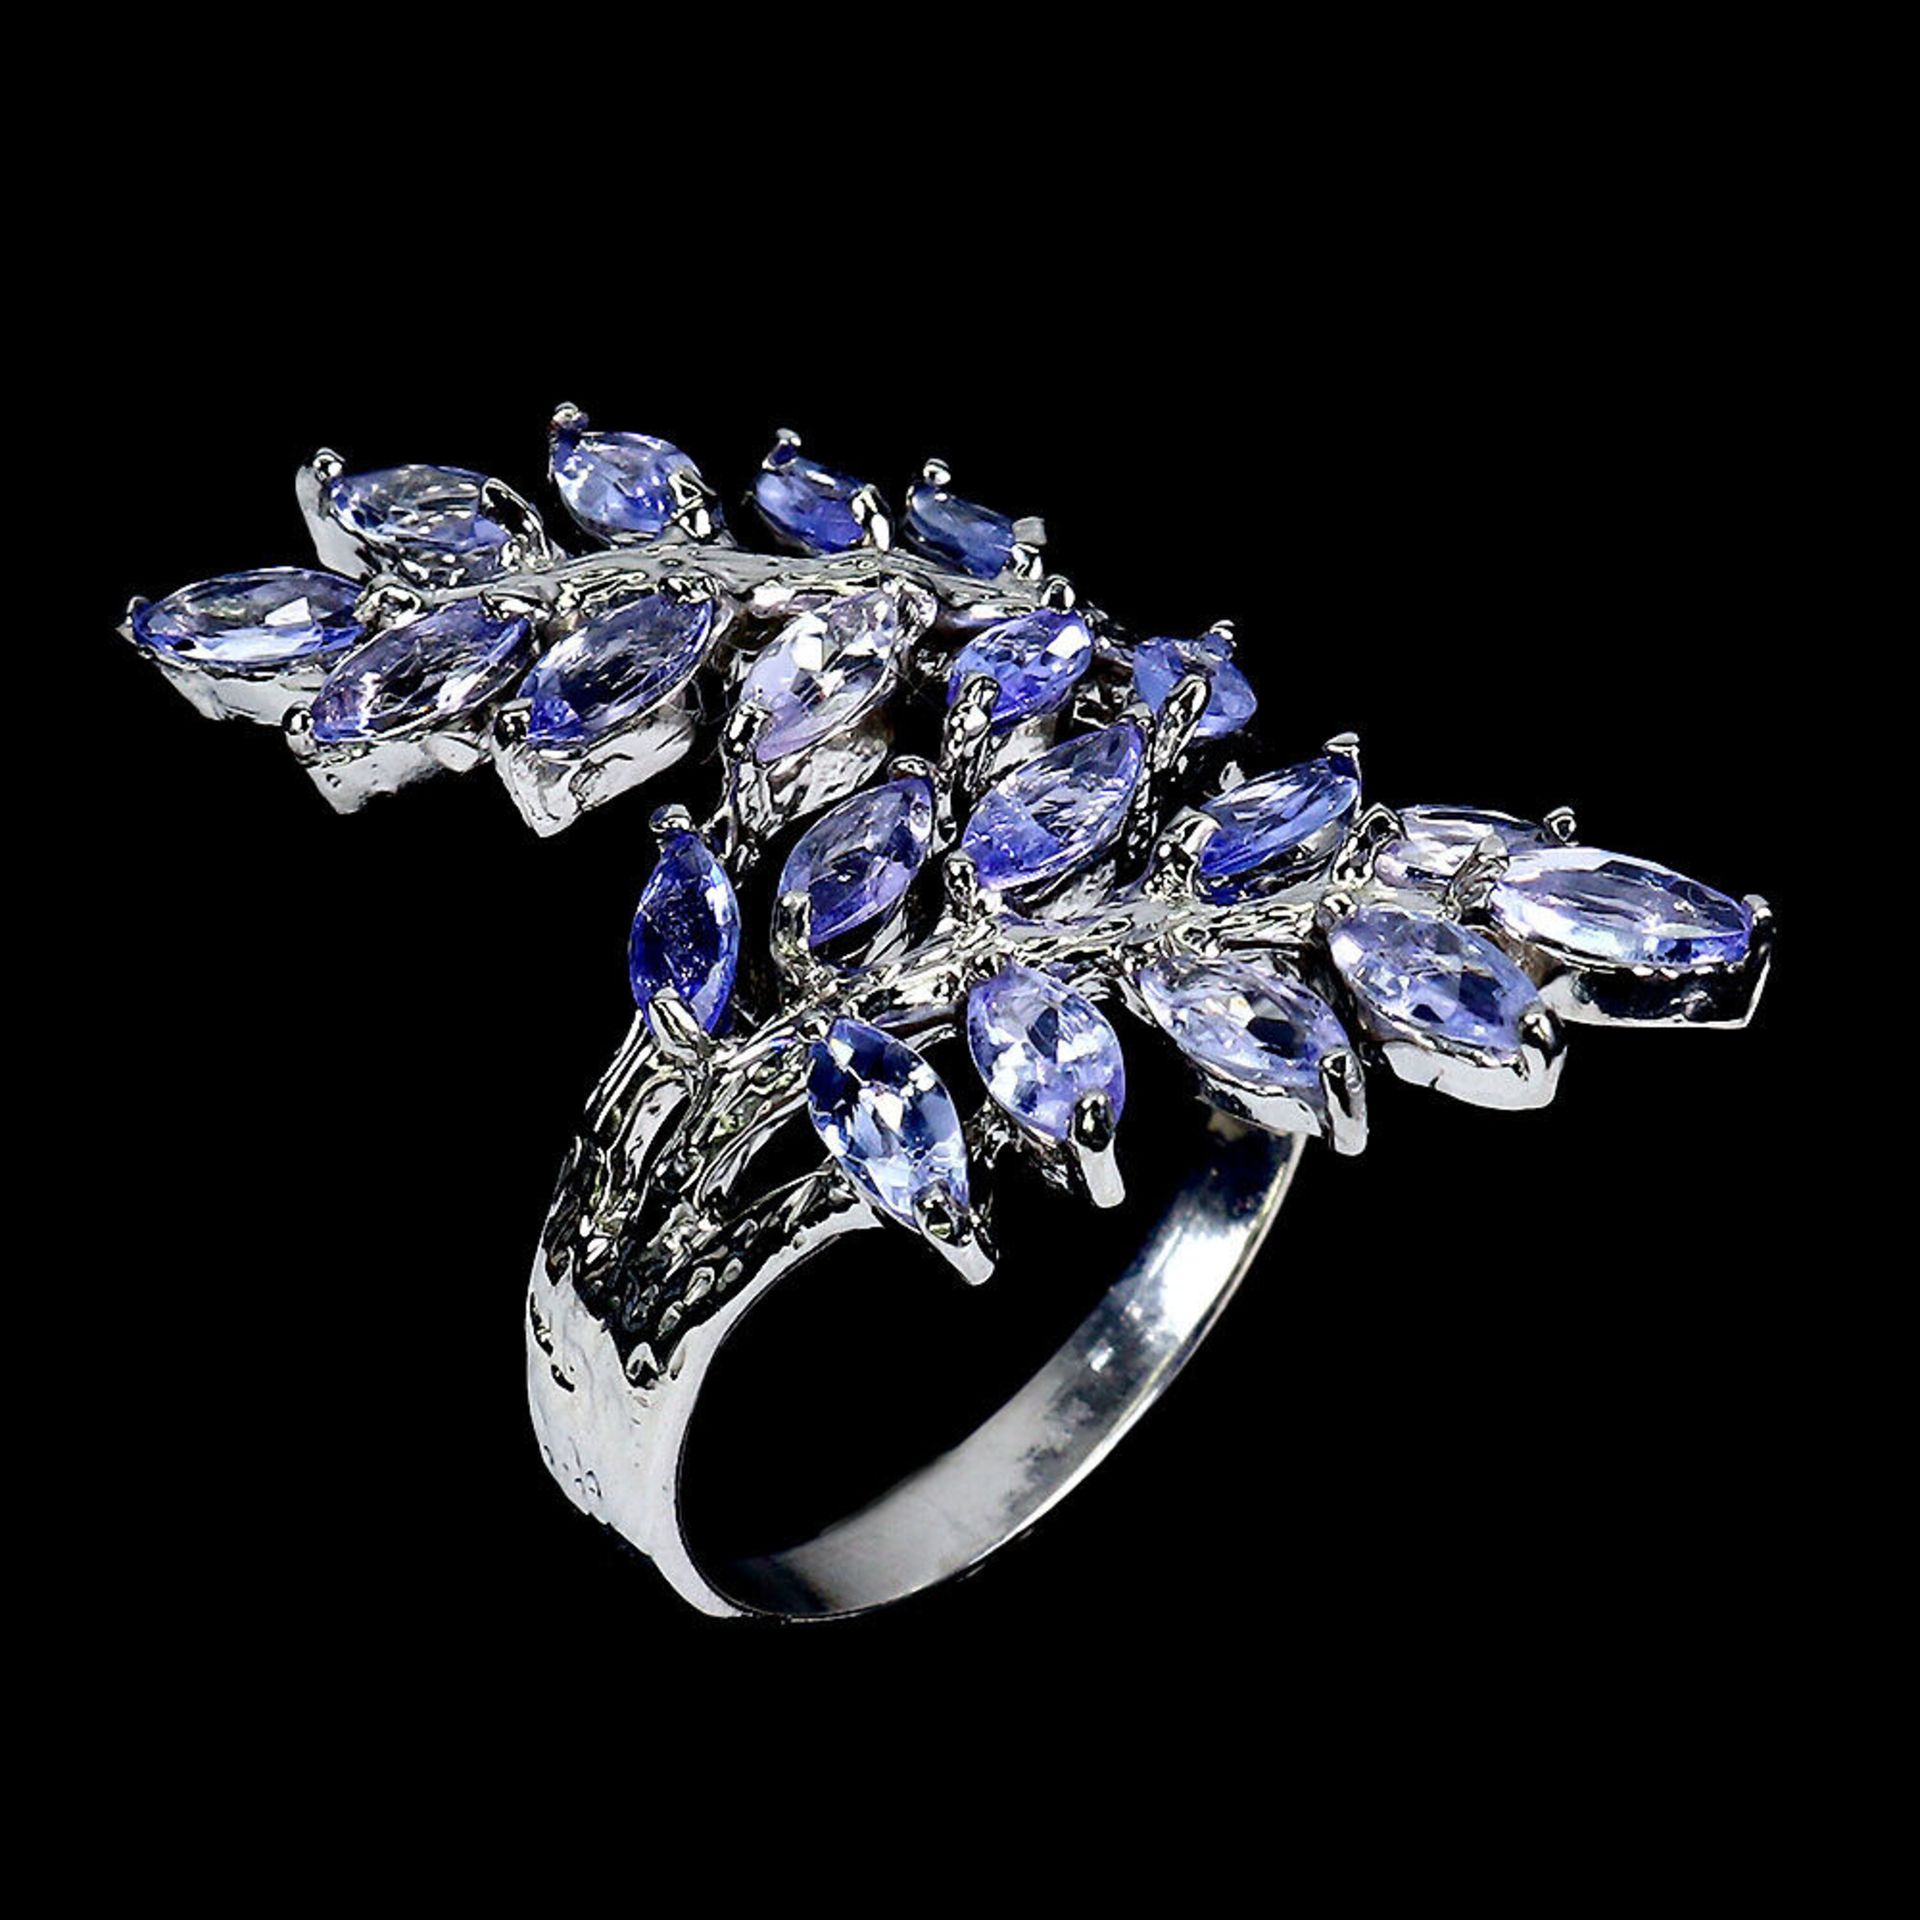 A 925 silver ring set with marquise cut tanzanites, ring size N.5. - Image 2 of 3